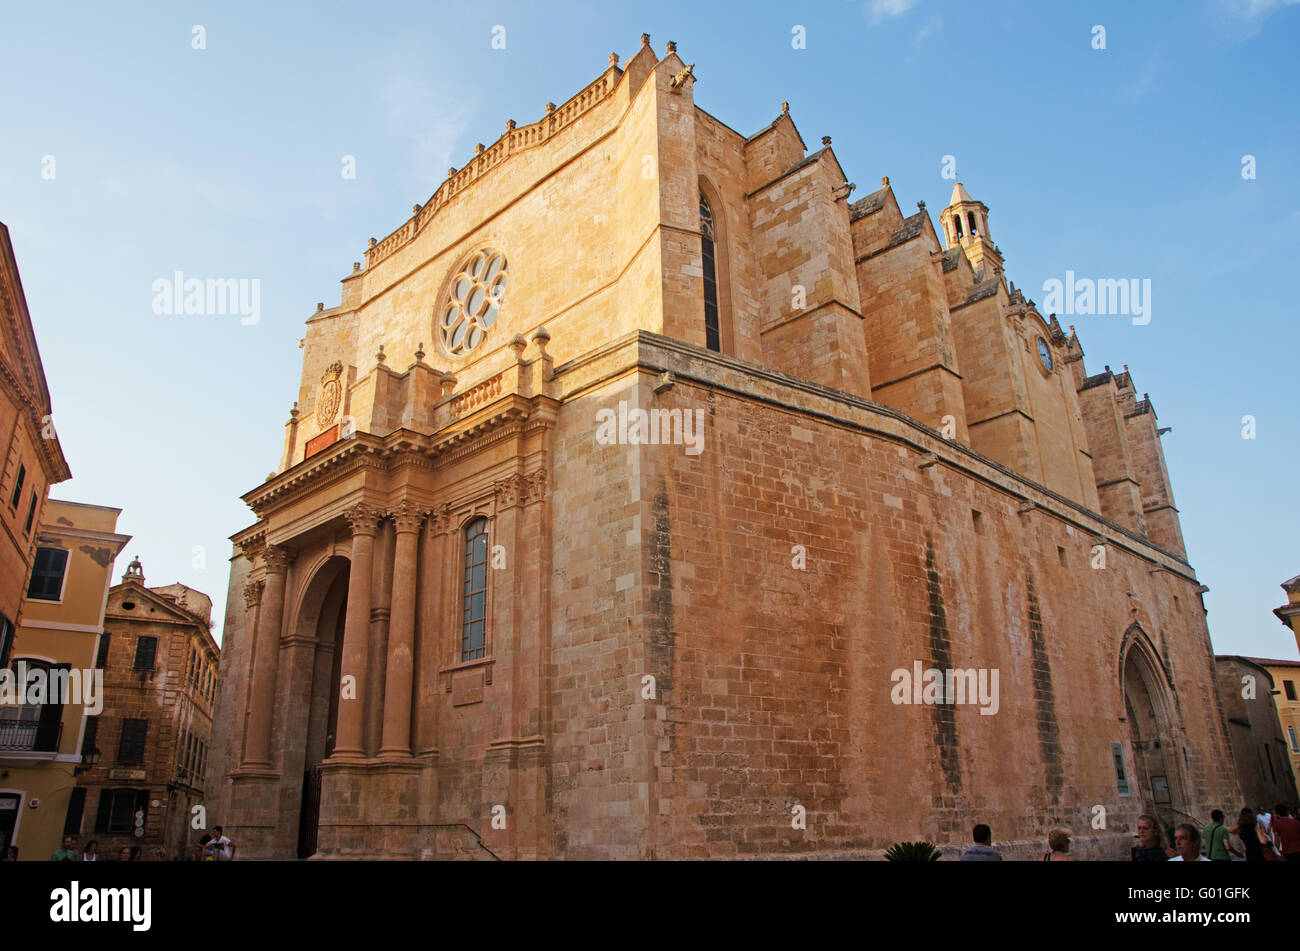 Menorca, Balearic Islands, Spain: view of the Cathedral Basilica of Ciutadella, the Church of Saint Mary constructed on the site of an old mosque Stock Photo